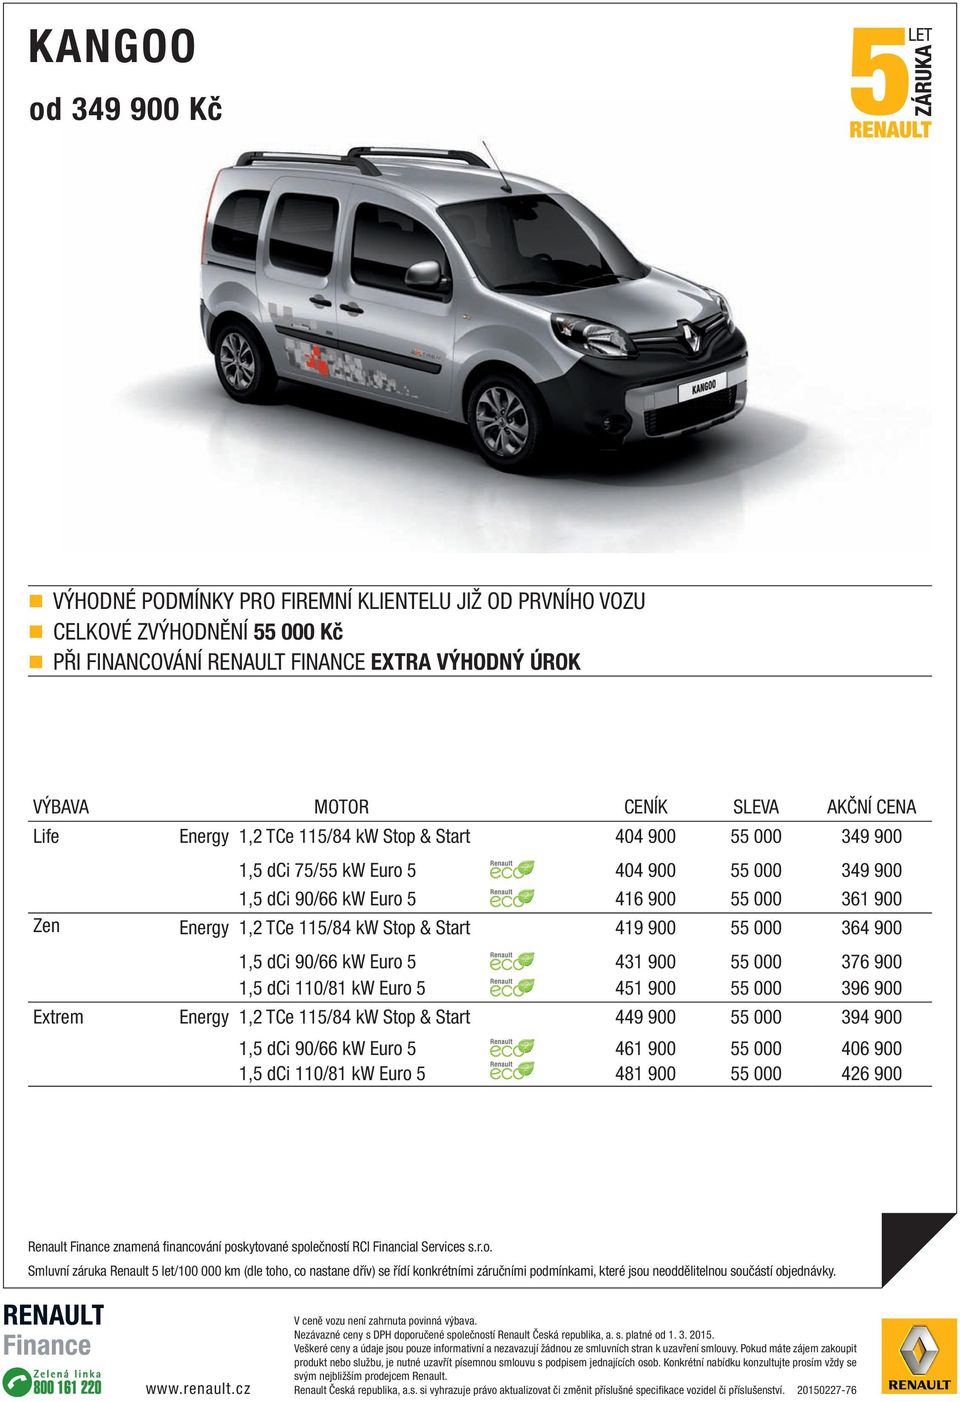 Start 419 900 55 000 364 900 1,5 dci 90/66 kw Euro 5 431 900 55 000 376 900 1,5 dci 110/81 kw Euro 5 451 900 55 000 396 900 Extrem Energy 1,2 TCe 115/84 kw Stop & Start 449 900 55 000 394 900 1,5 dci